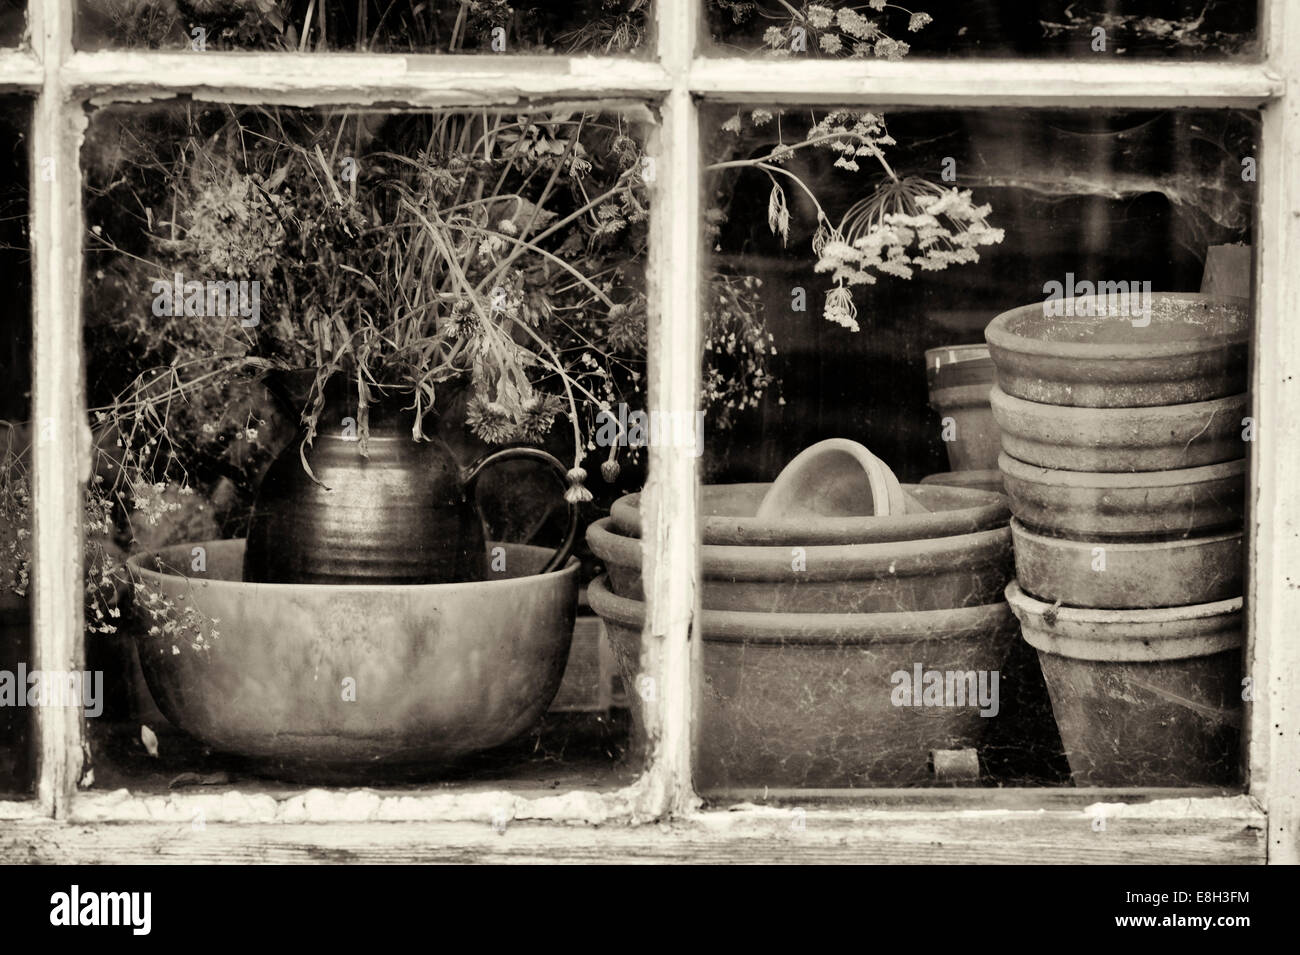 Dried Flowers and terracotta plant pots in a potting shed window. Sepia ...